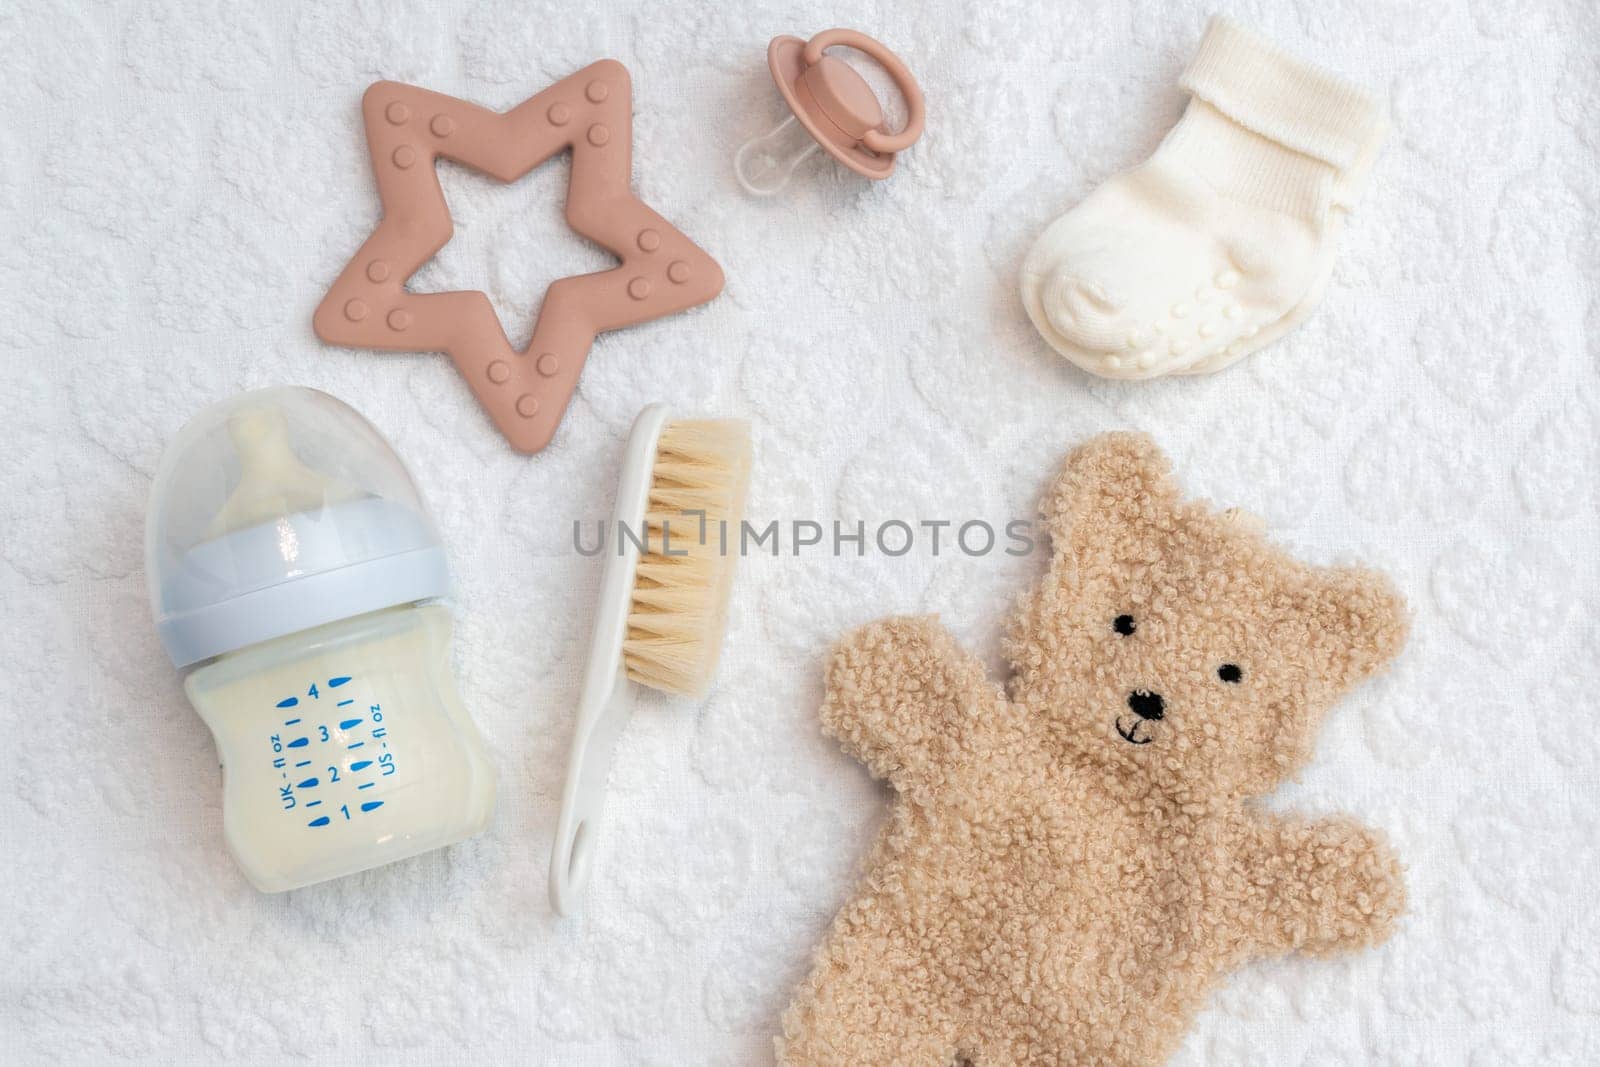 Glimpse into a well-curated collection of newborn accessories, captured in top view, emphasizing